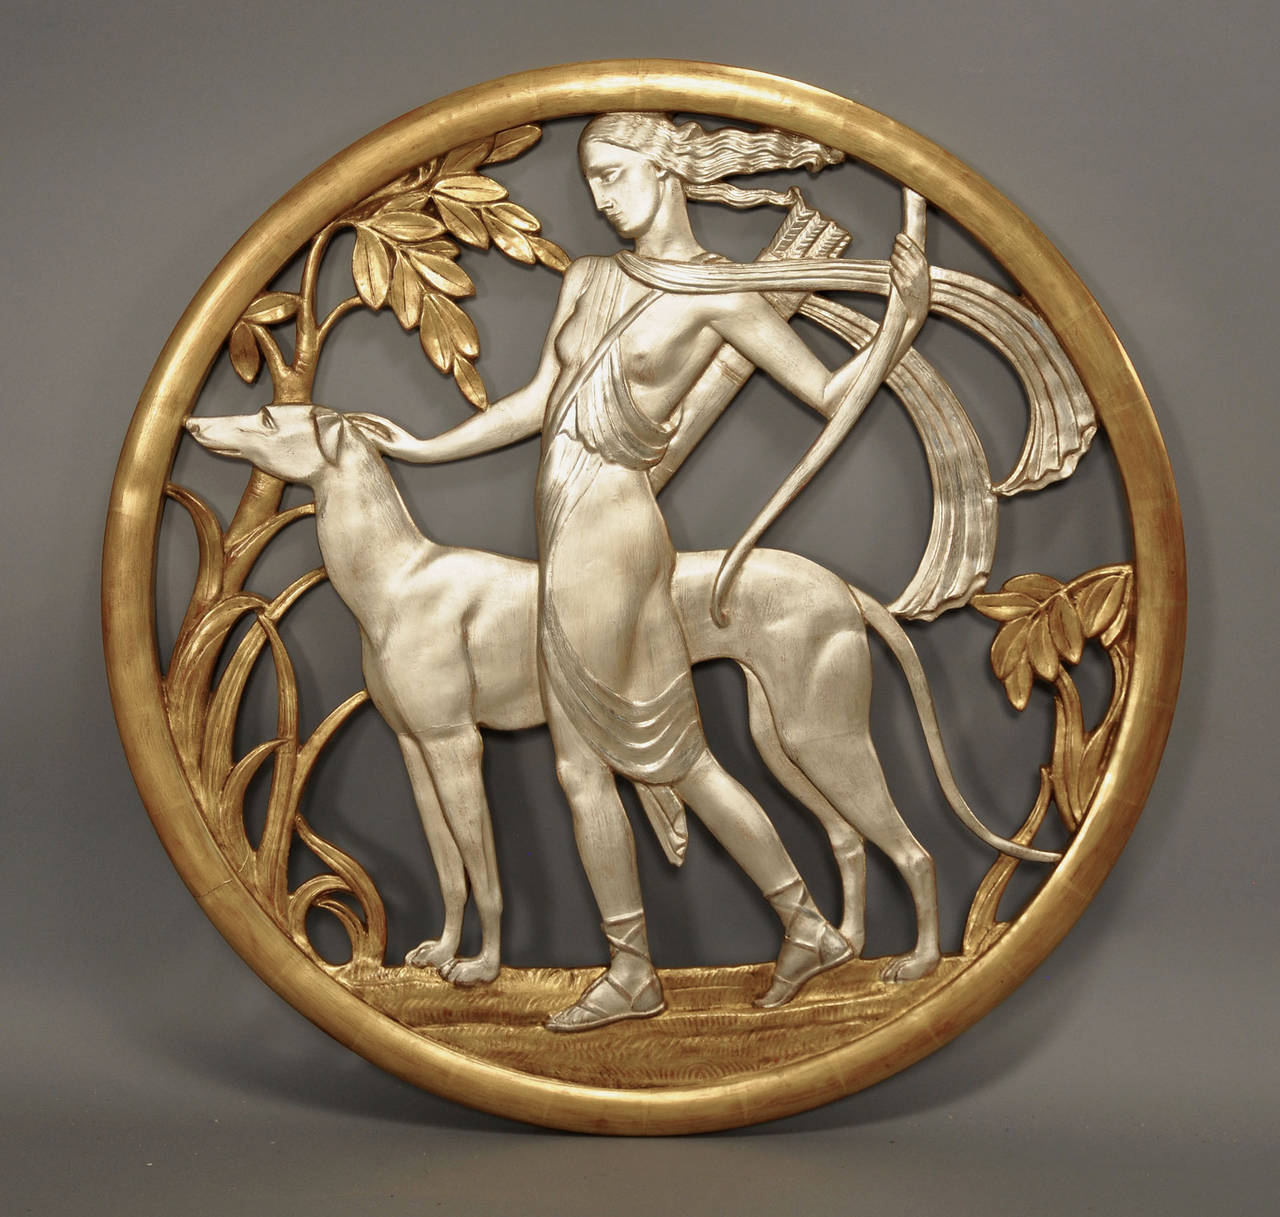 Art Deco round gilt and silver gilt filigree wall plaque showing the goddess Diana hunting with her dog.